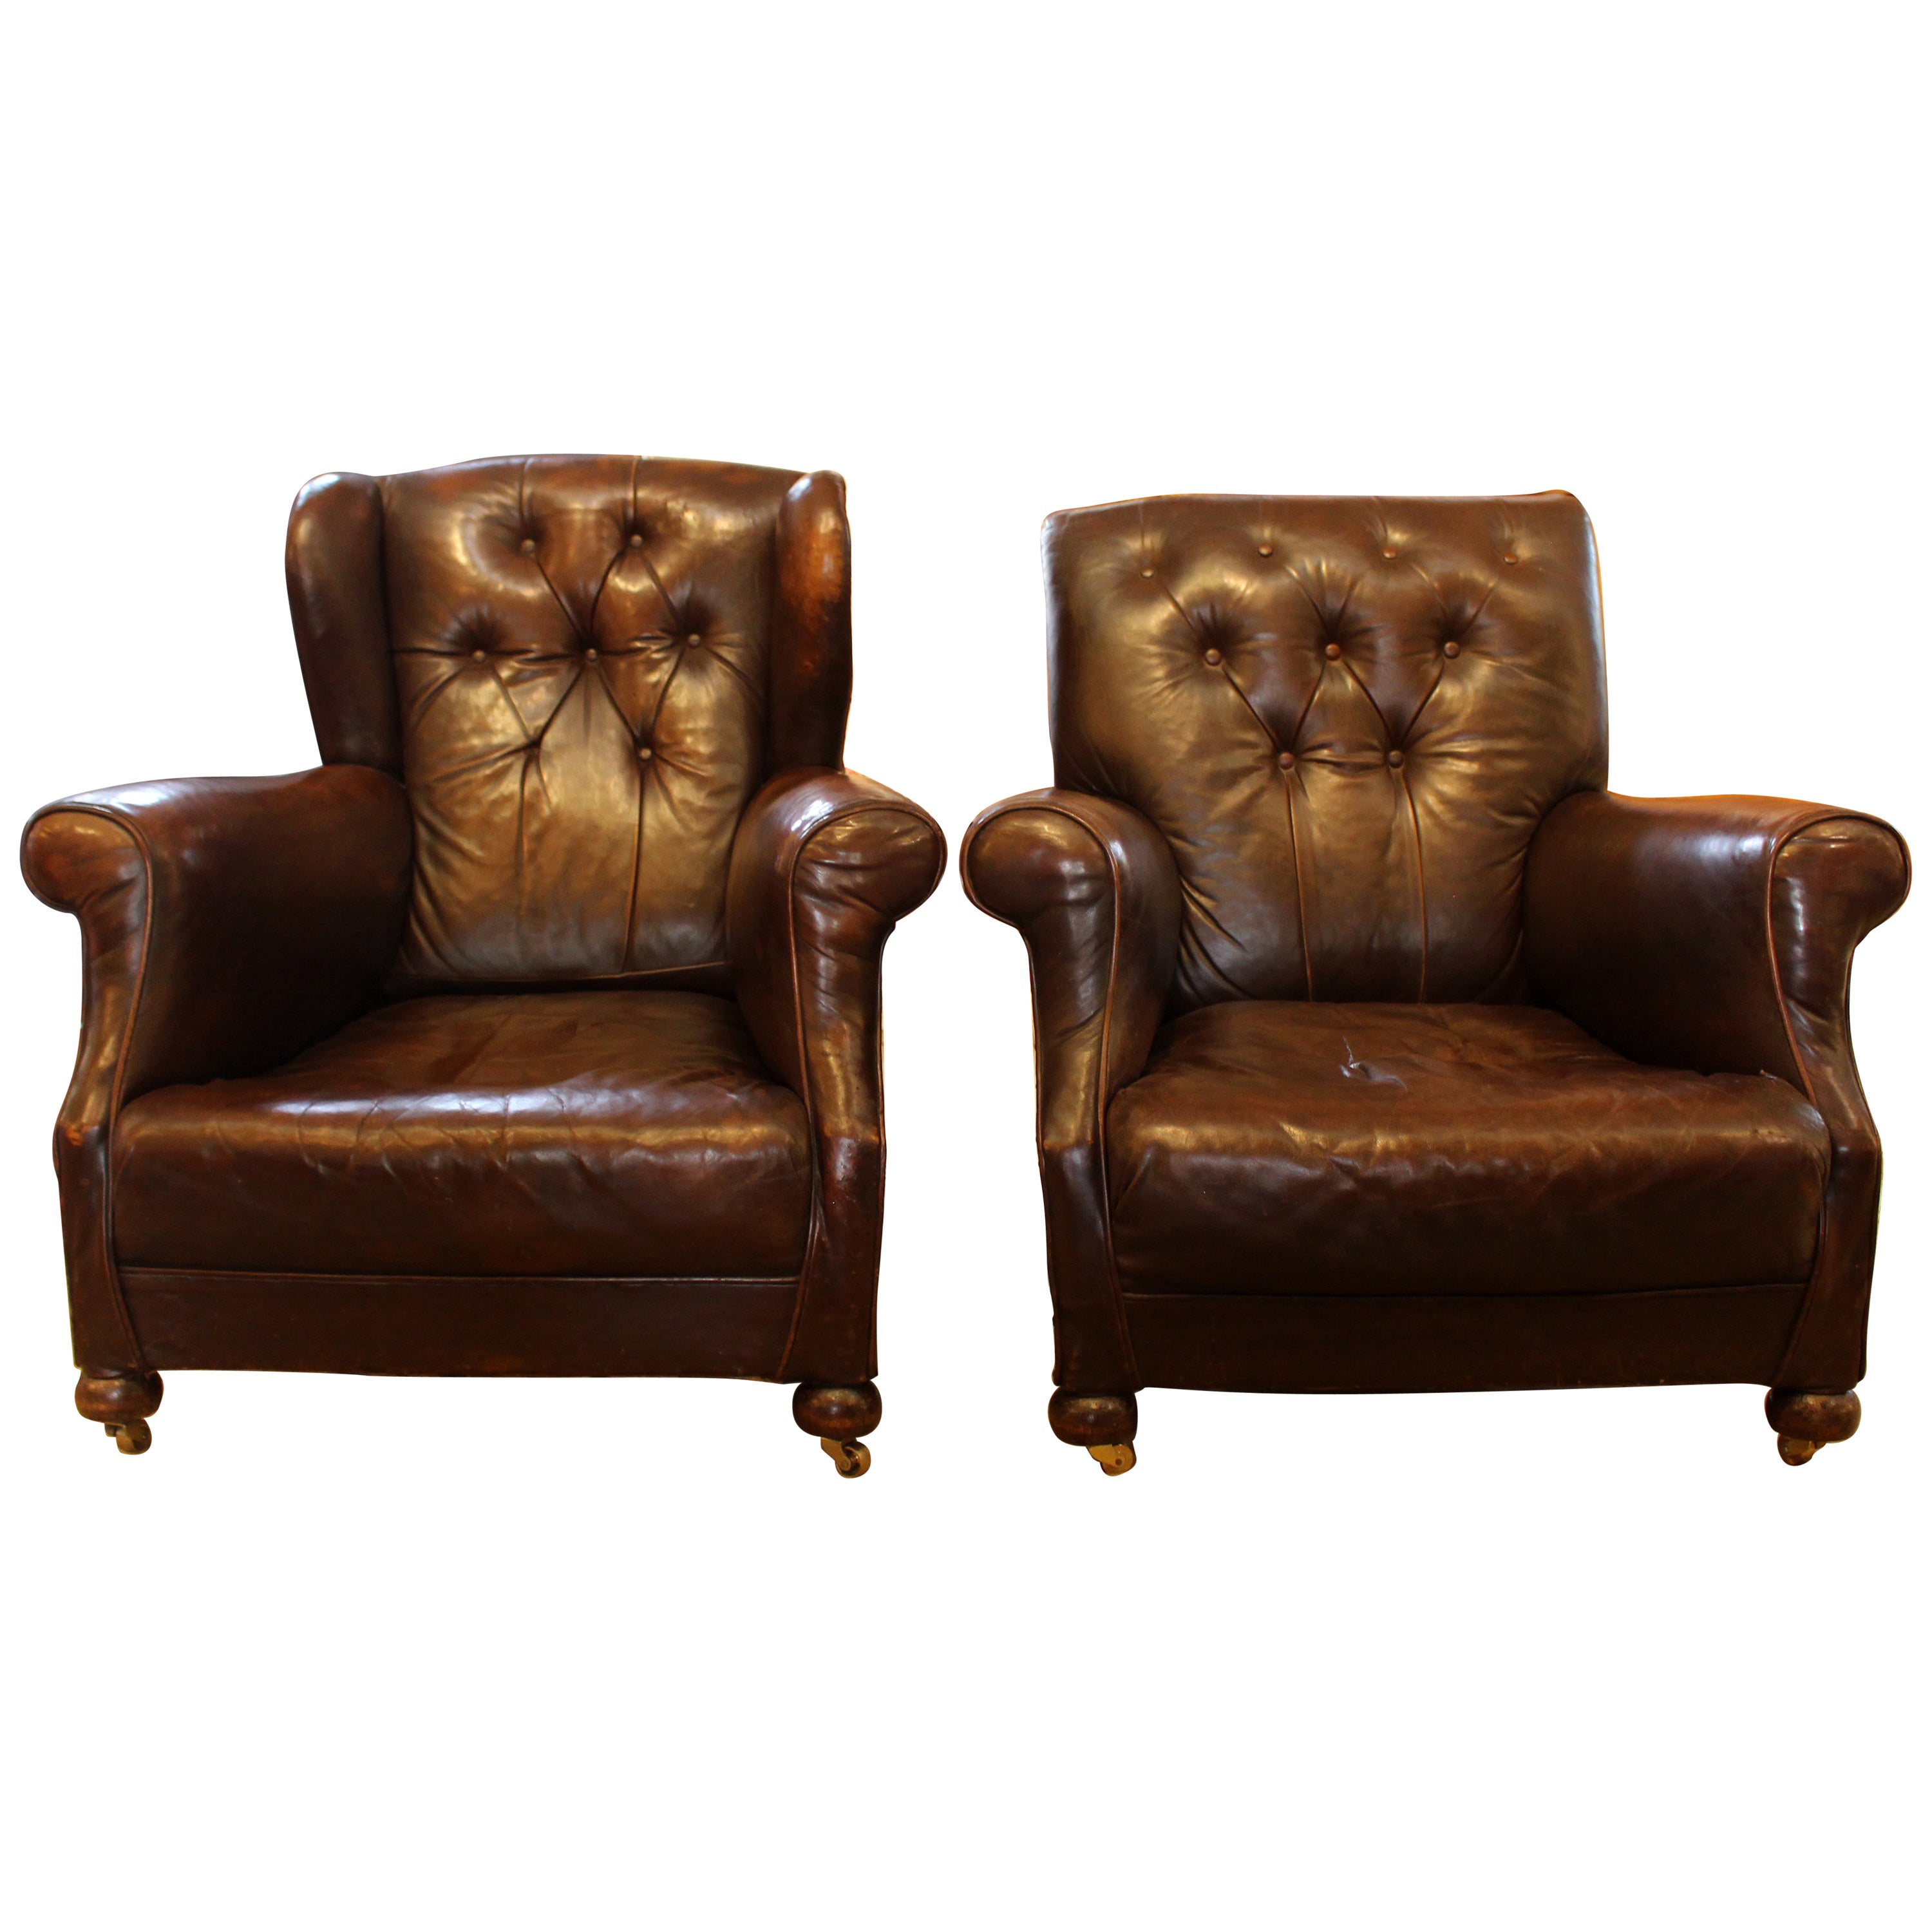 Late 19th Century English Pair of Leather Club Chairs